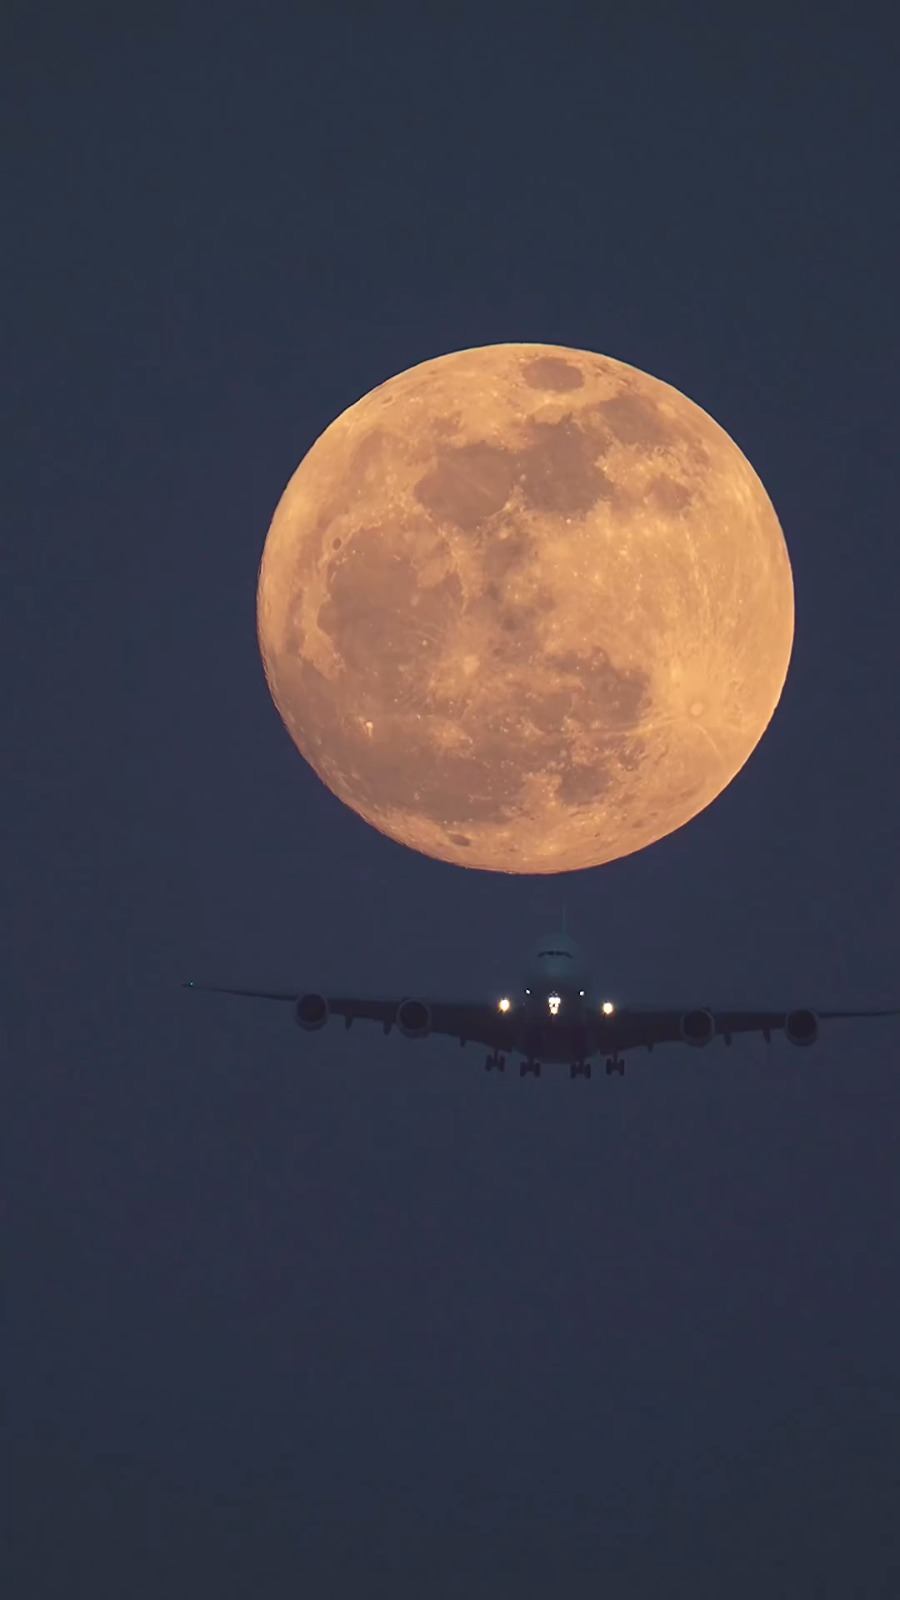 The largest passenger plane A380 crossing the moon 🌕